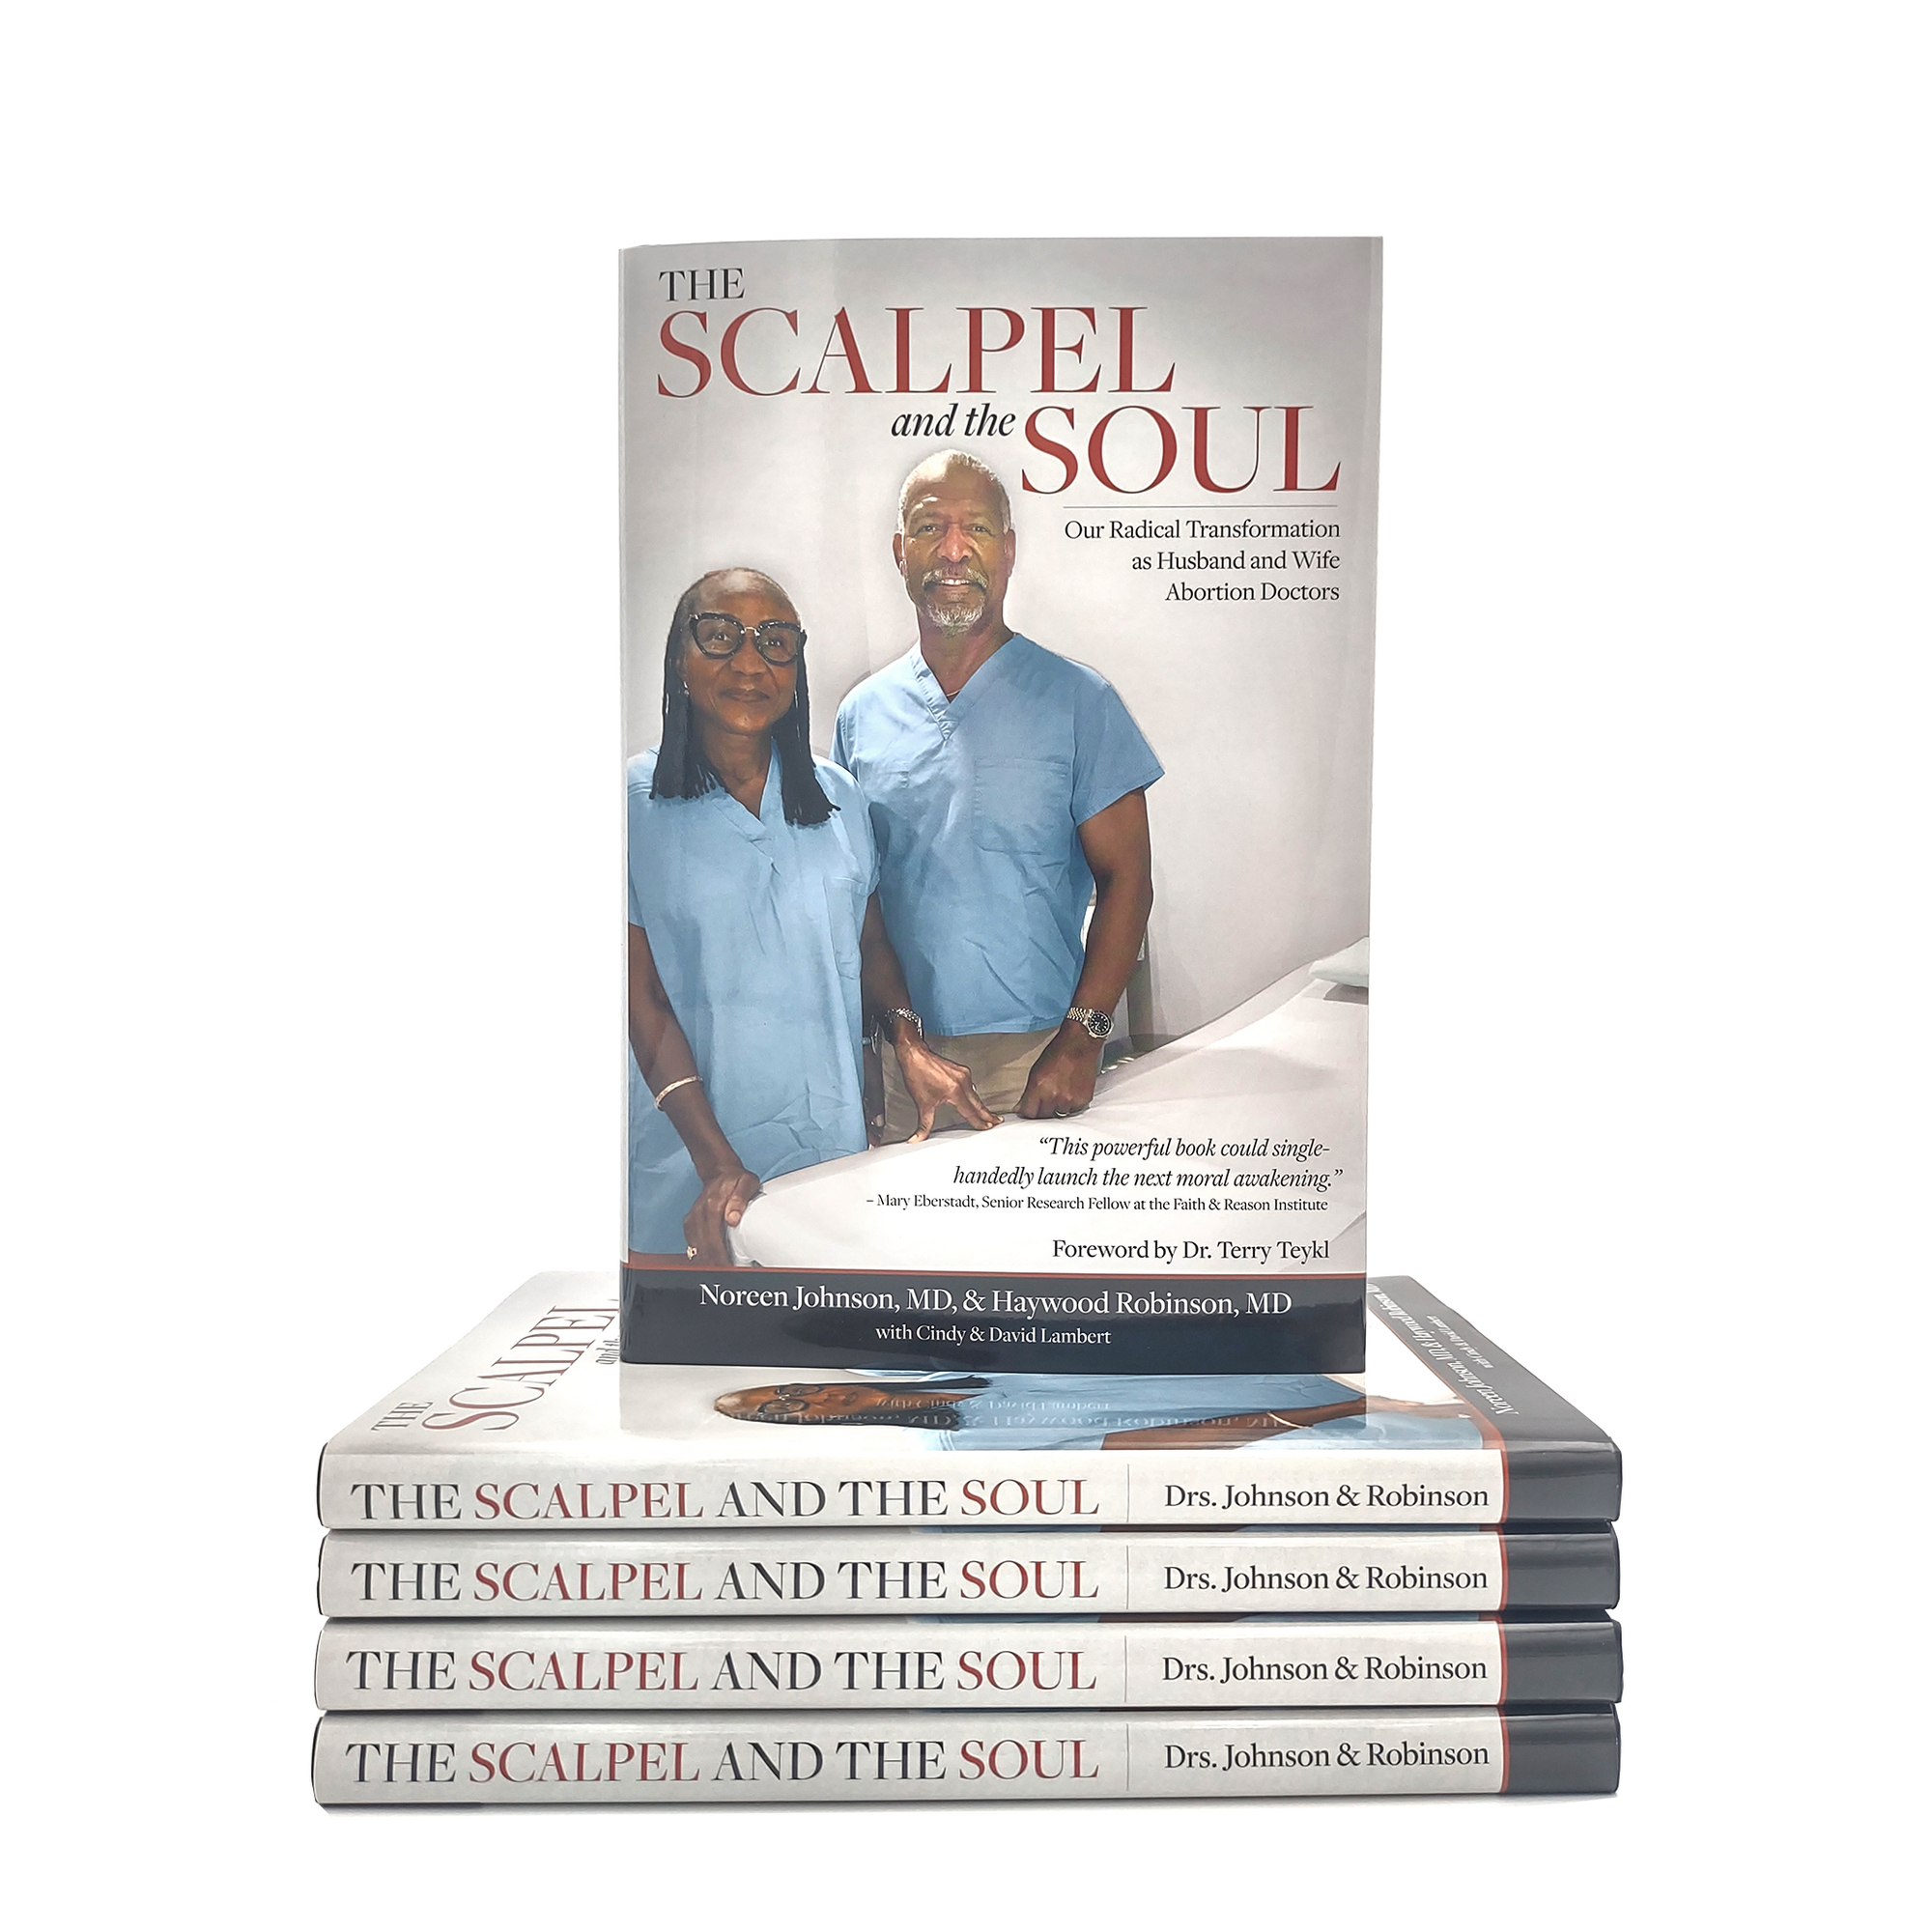 The Scalpel and the Soul [Hardcover]